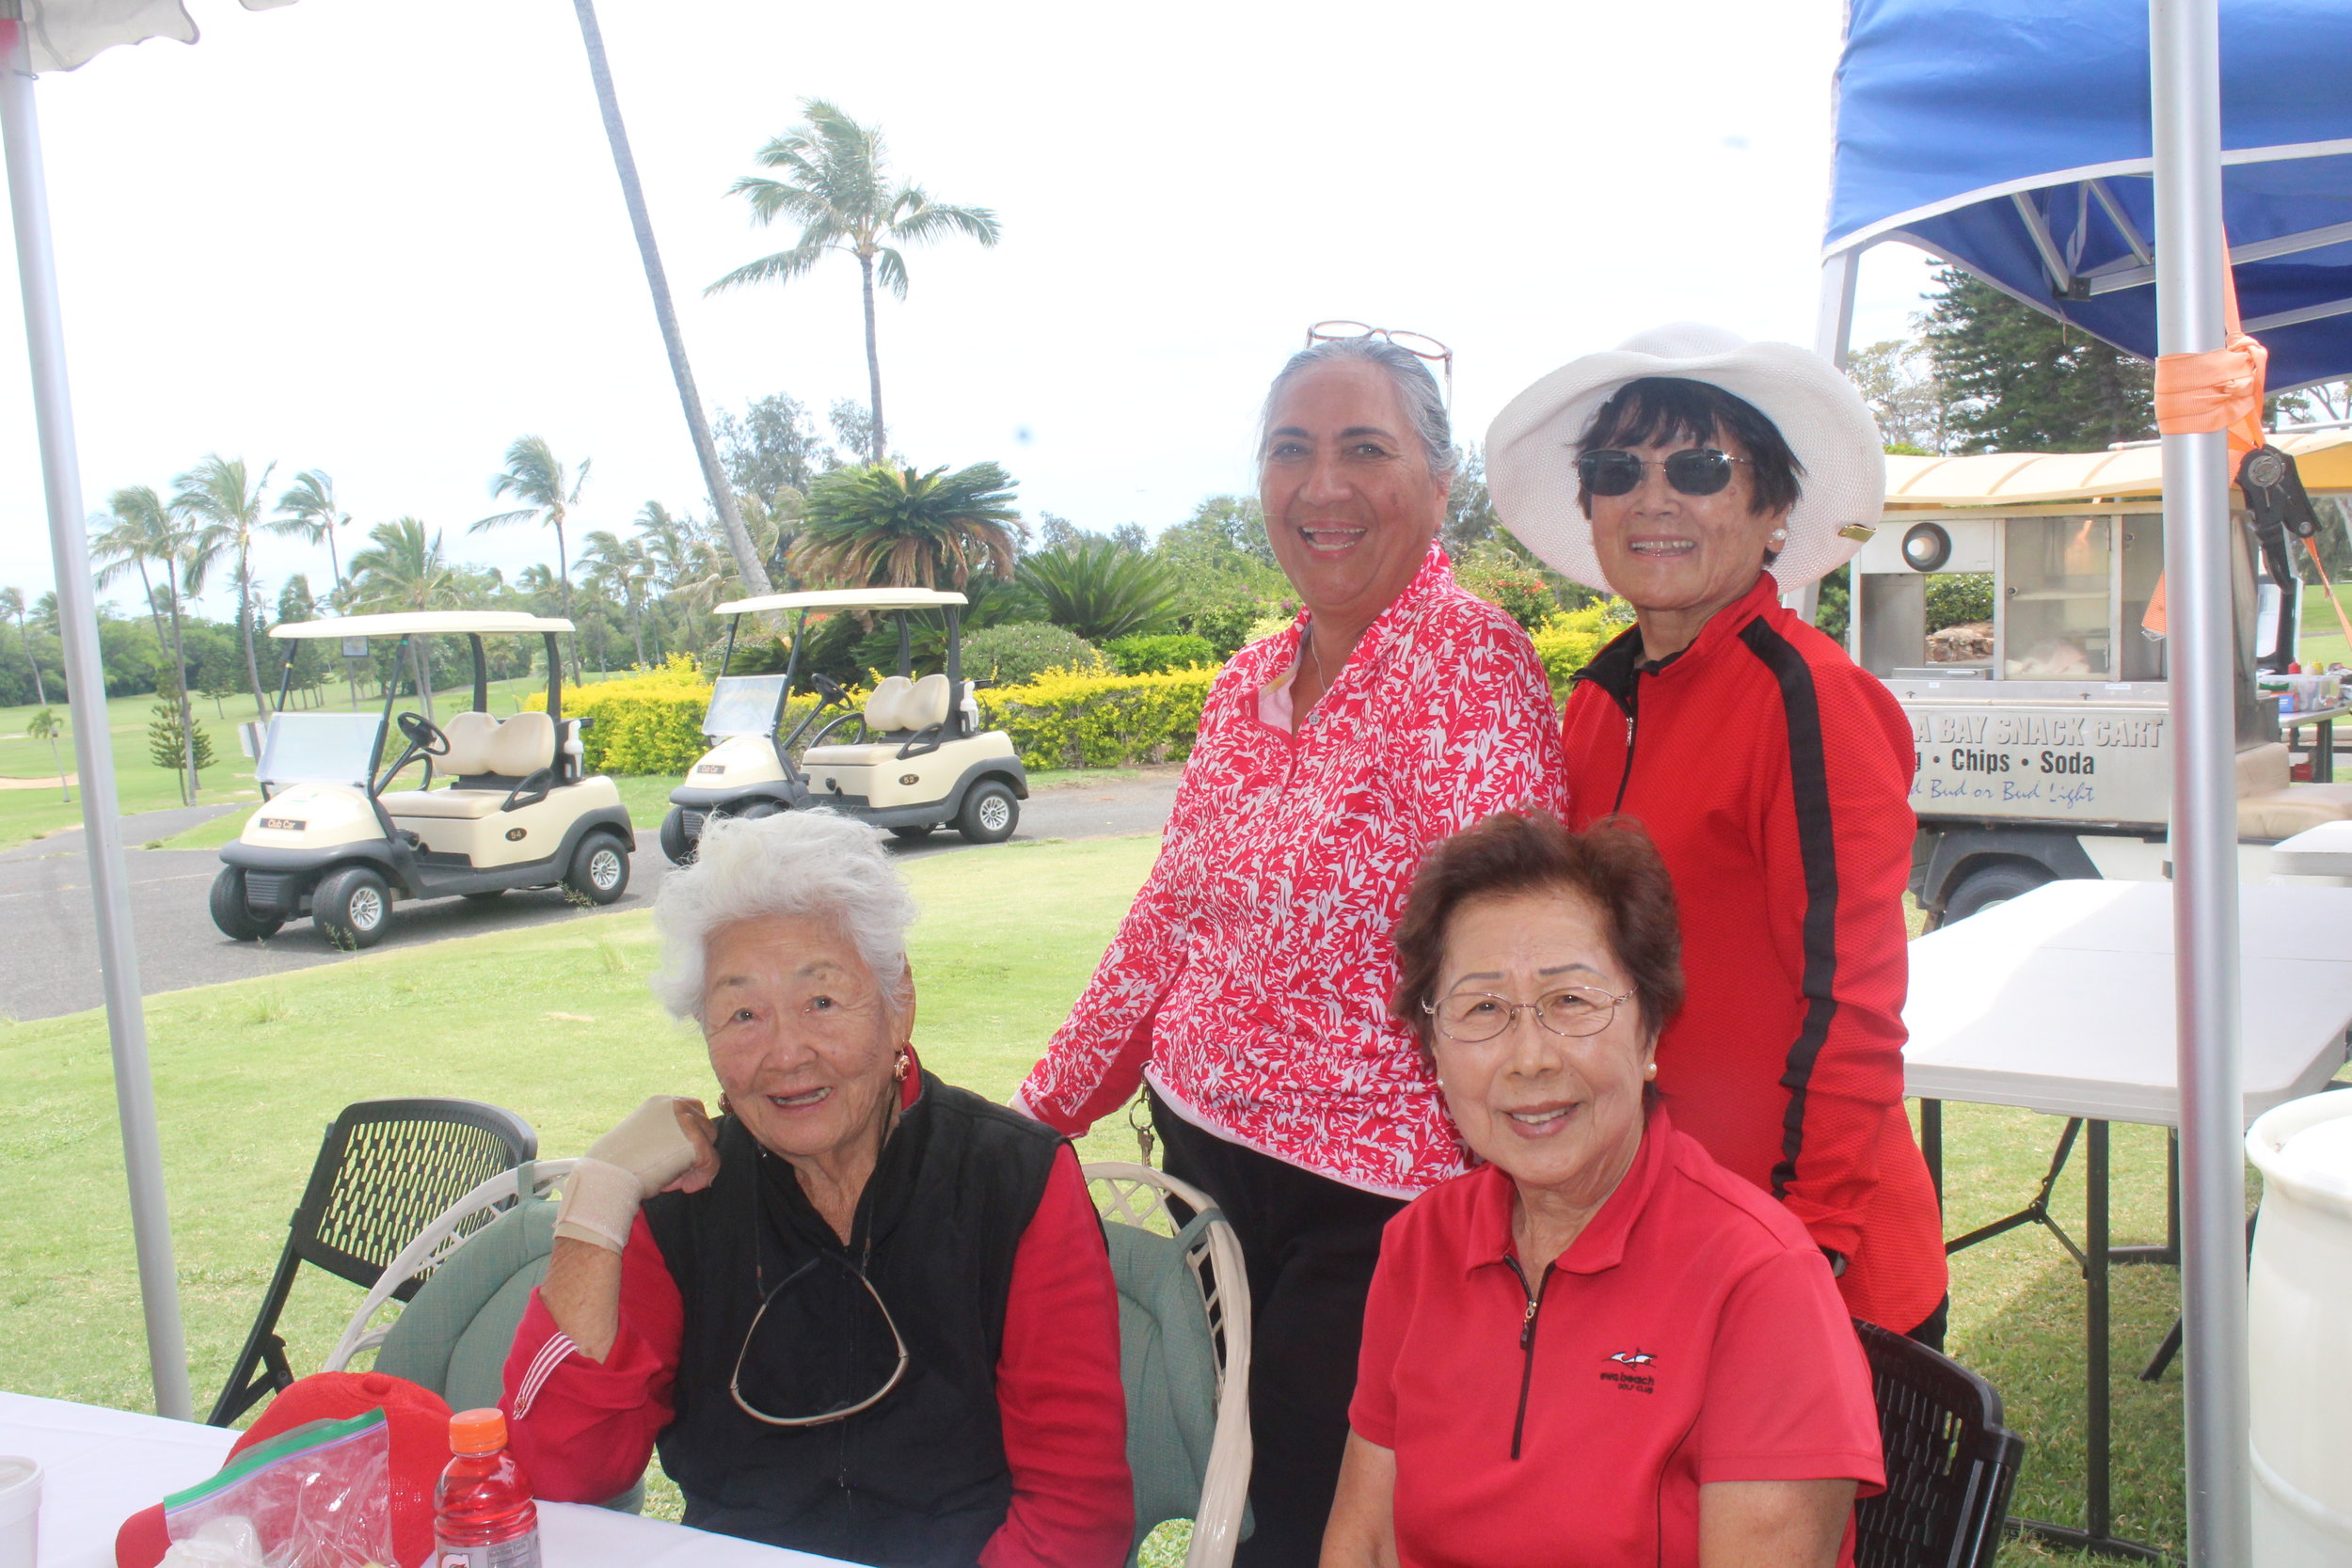  and of course, our 93 year old Elaine Lee.   